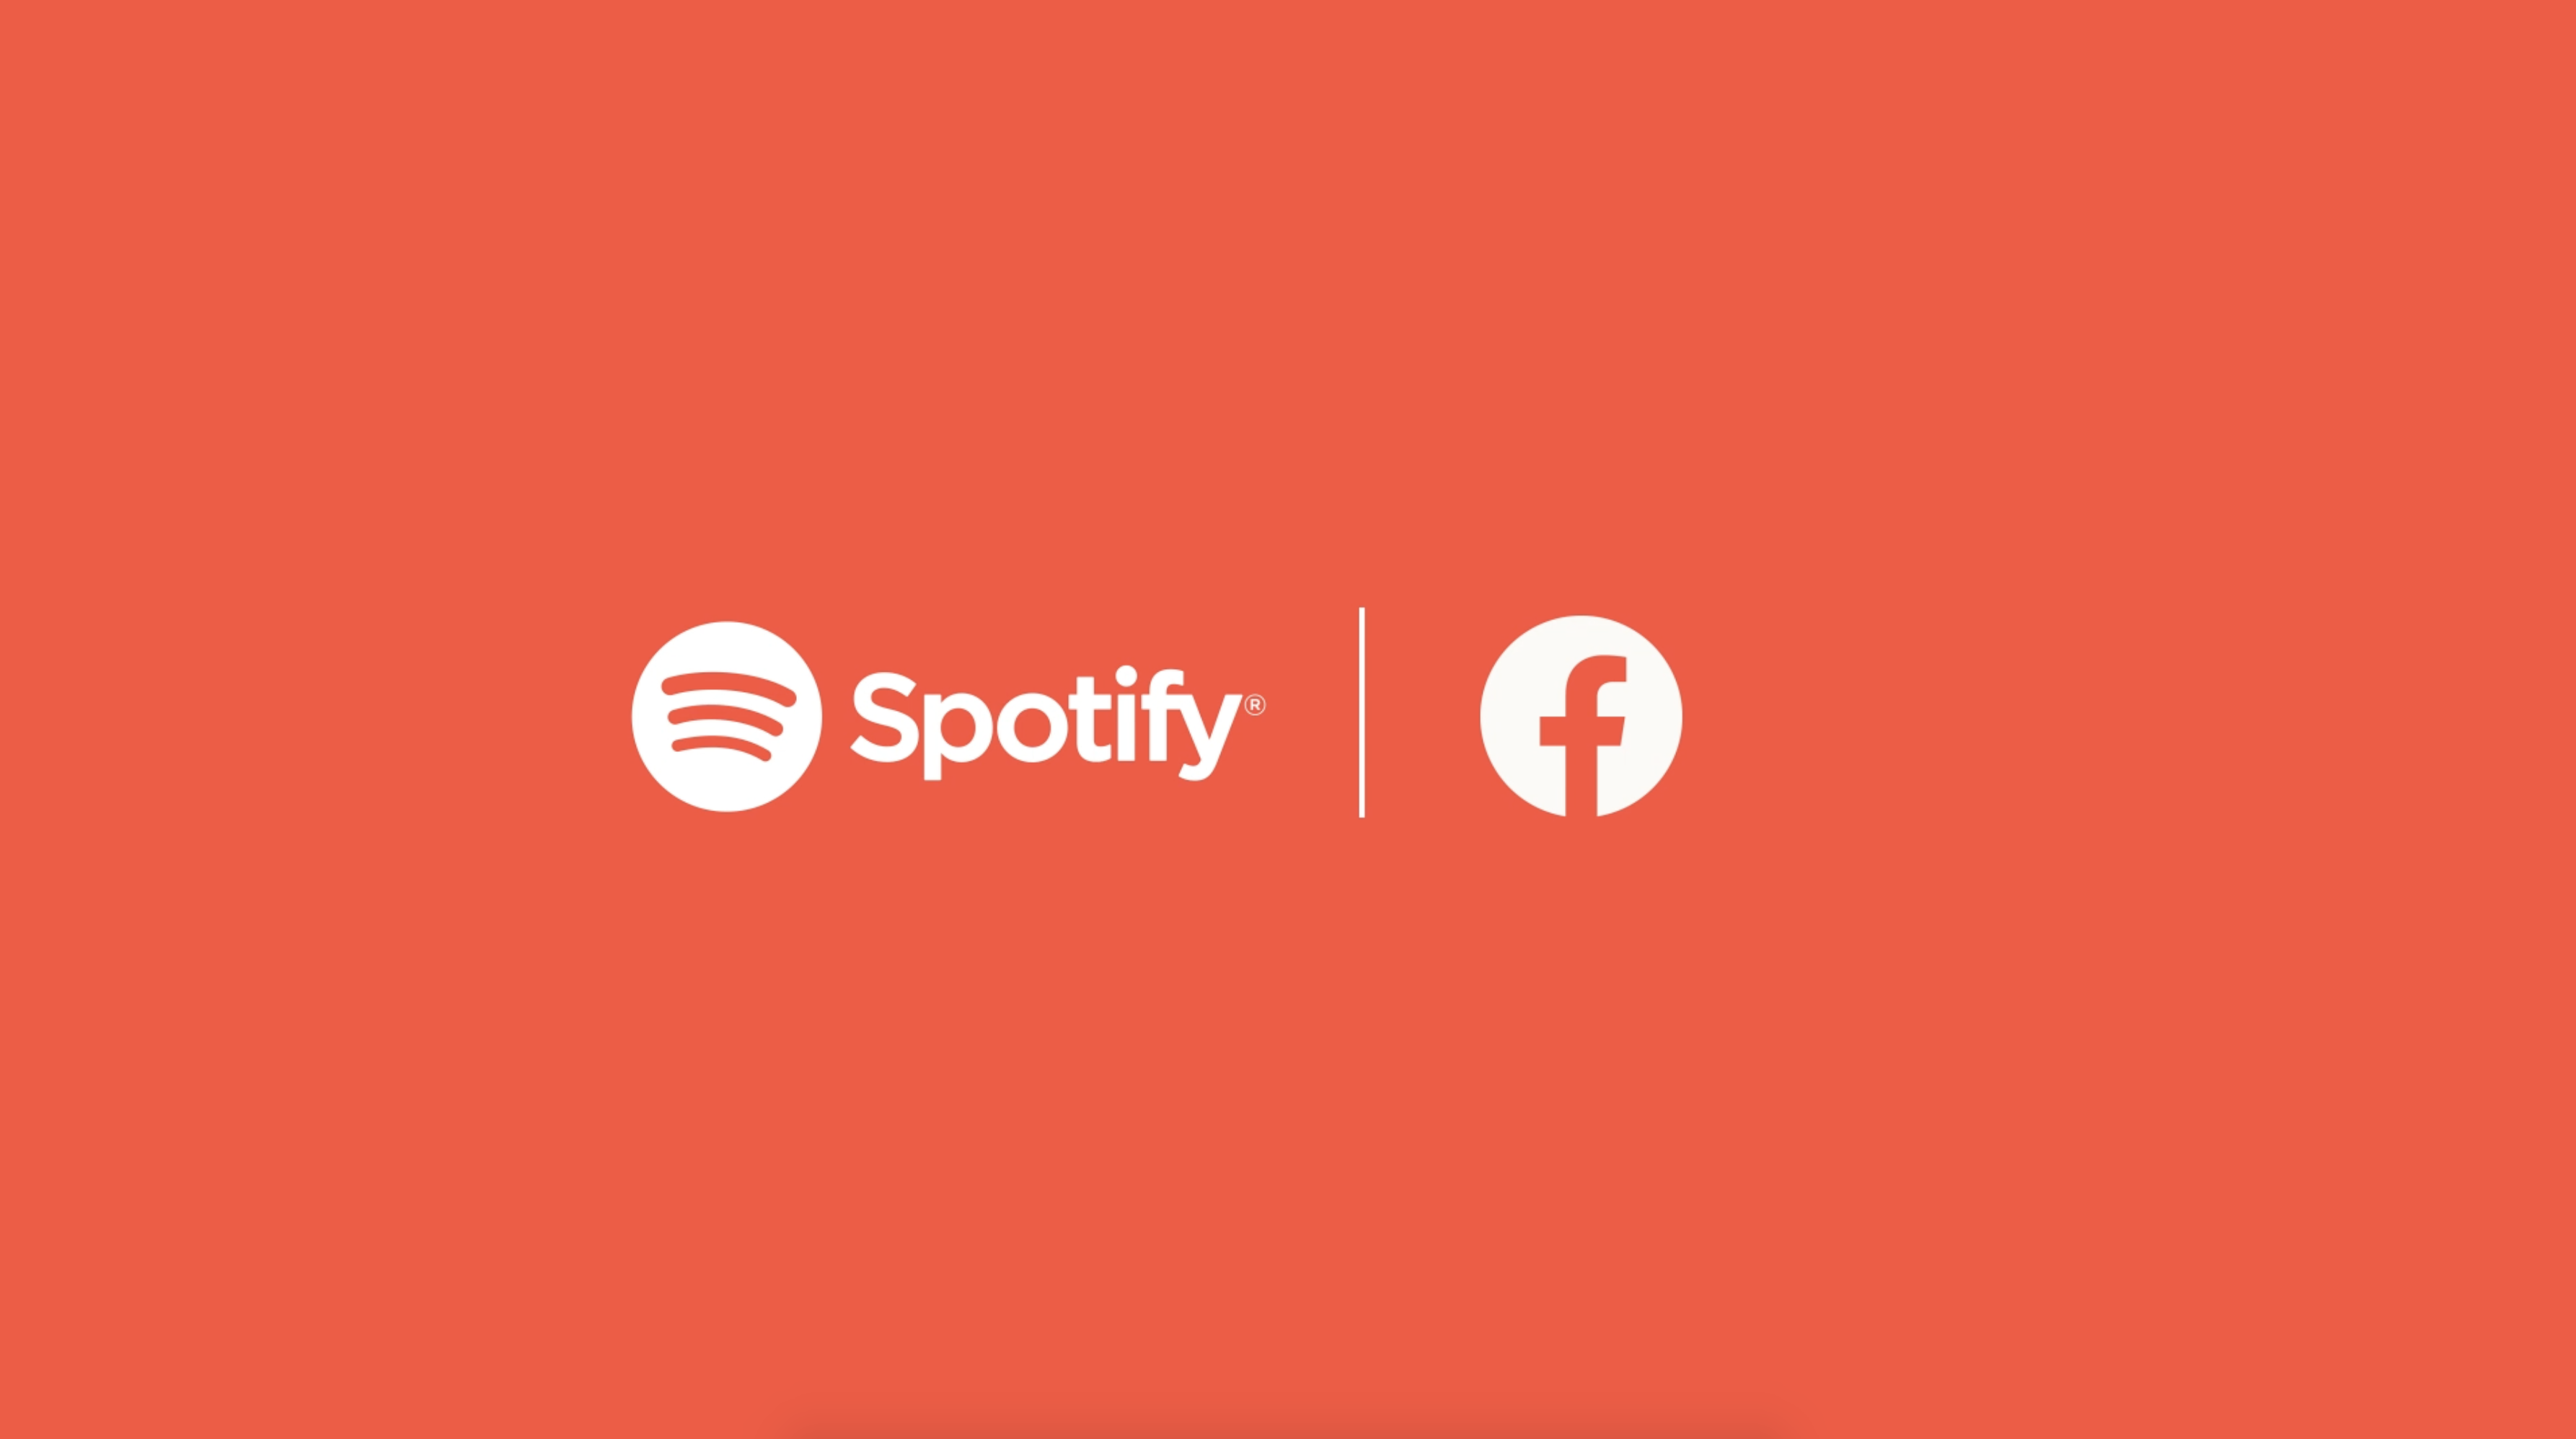 Share Explore And Discover Music And Podcasts Via Spotify In The Facebook App Spotify